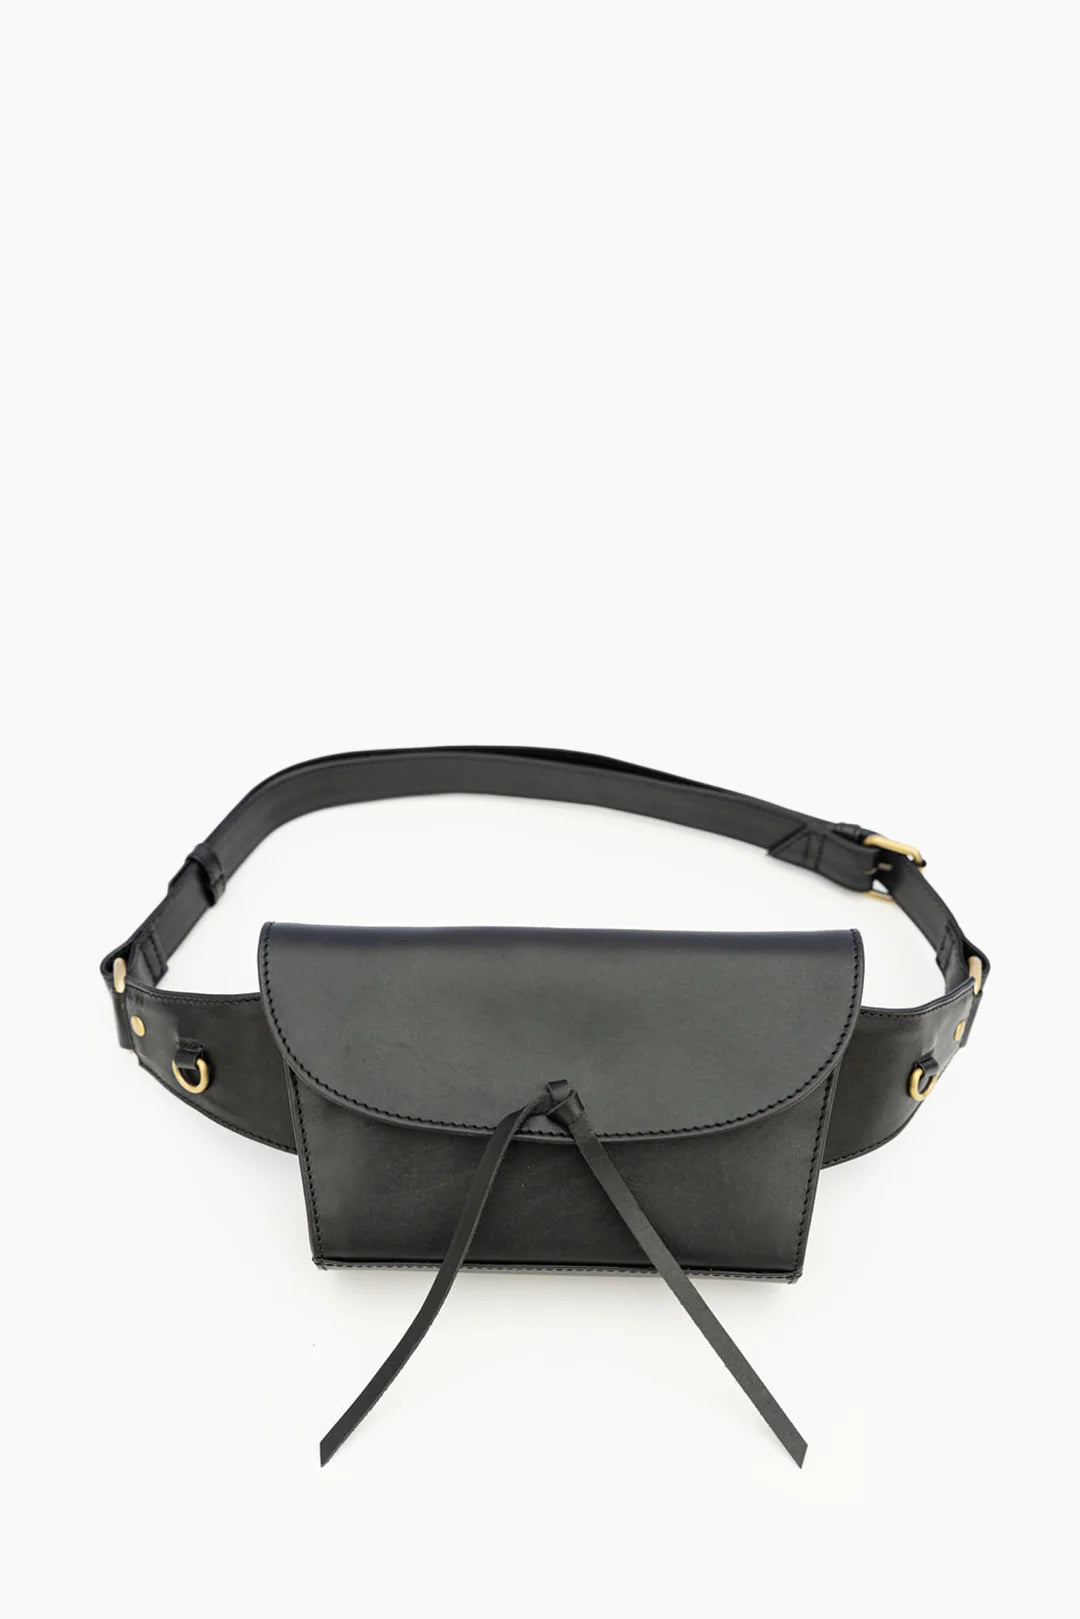 Load image into Gallery viewer, Solma Fanny Pack - Black - Small/Medium
